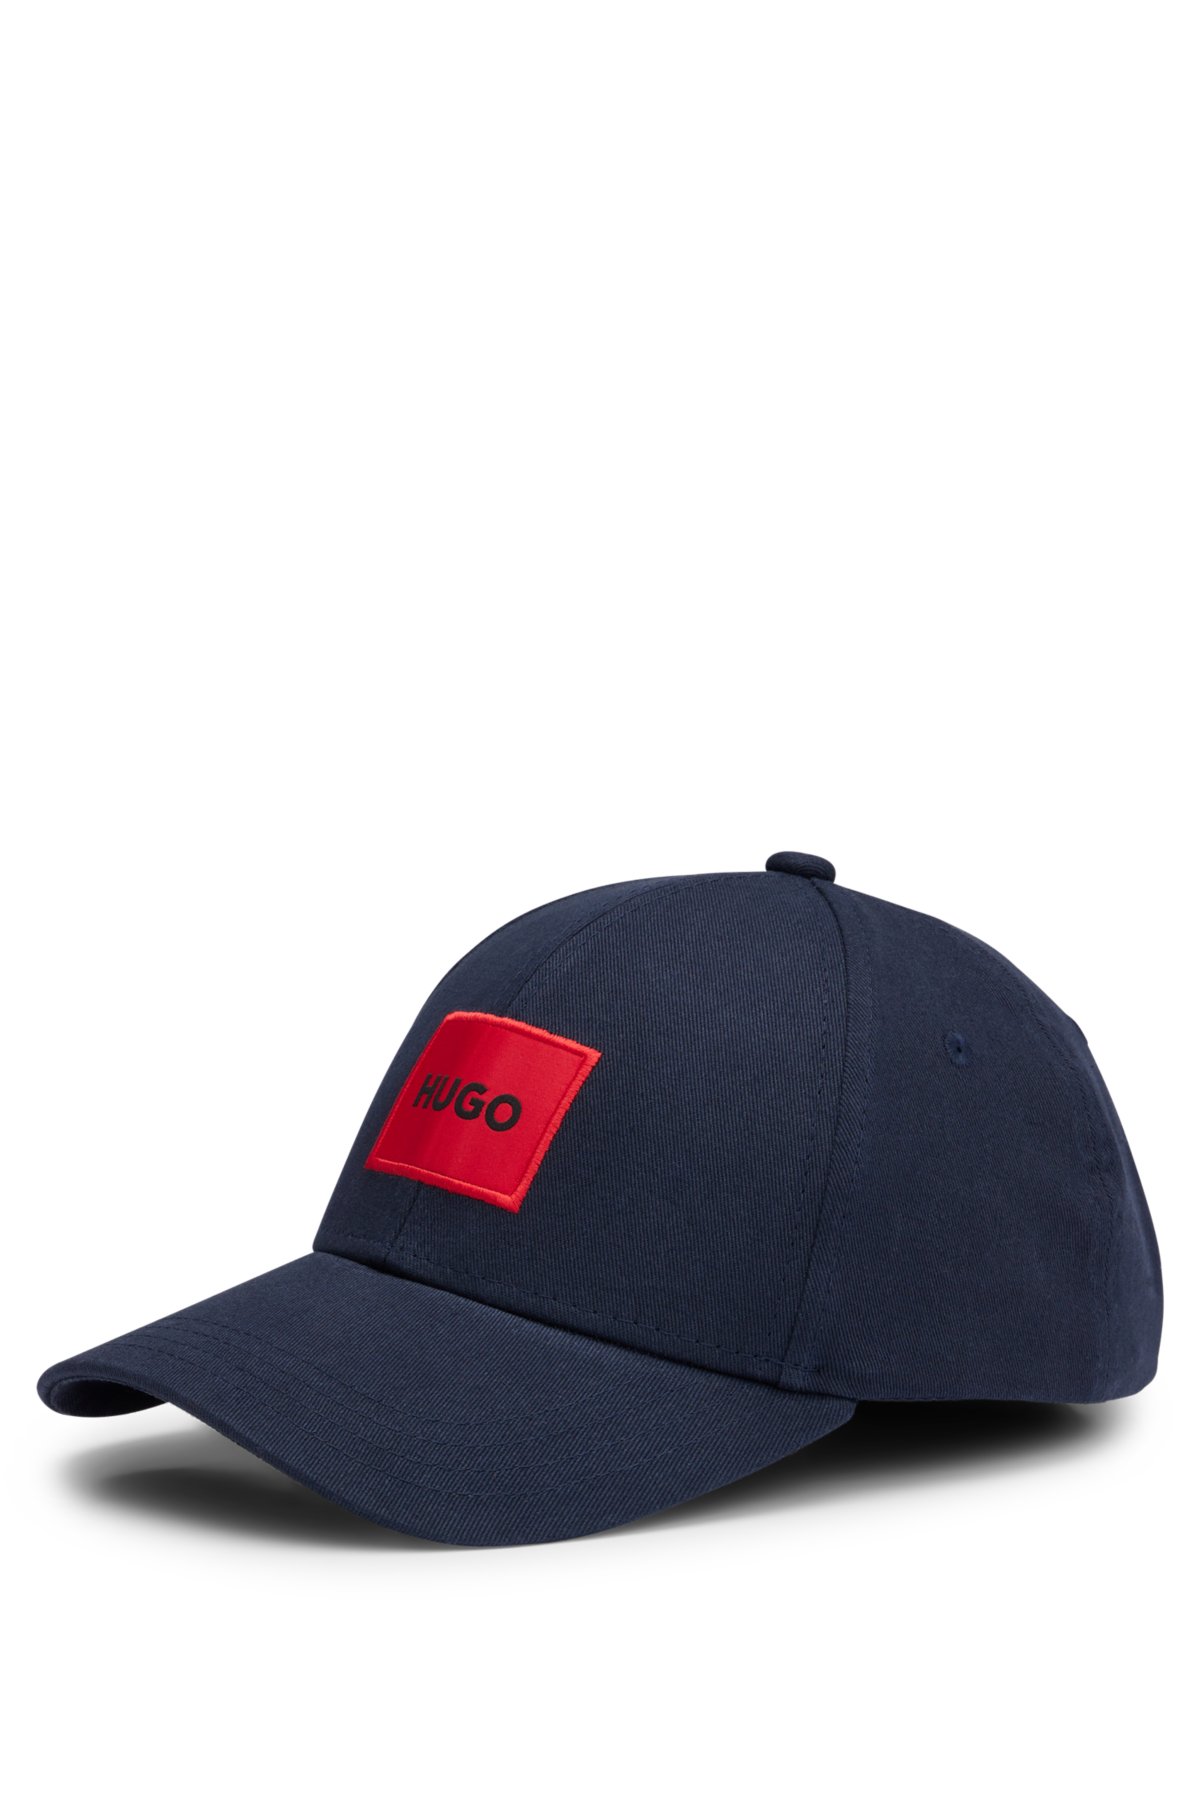 with logo - HUGO Cotton-twill cap label red